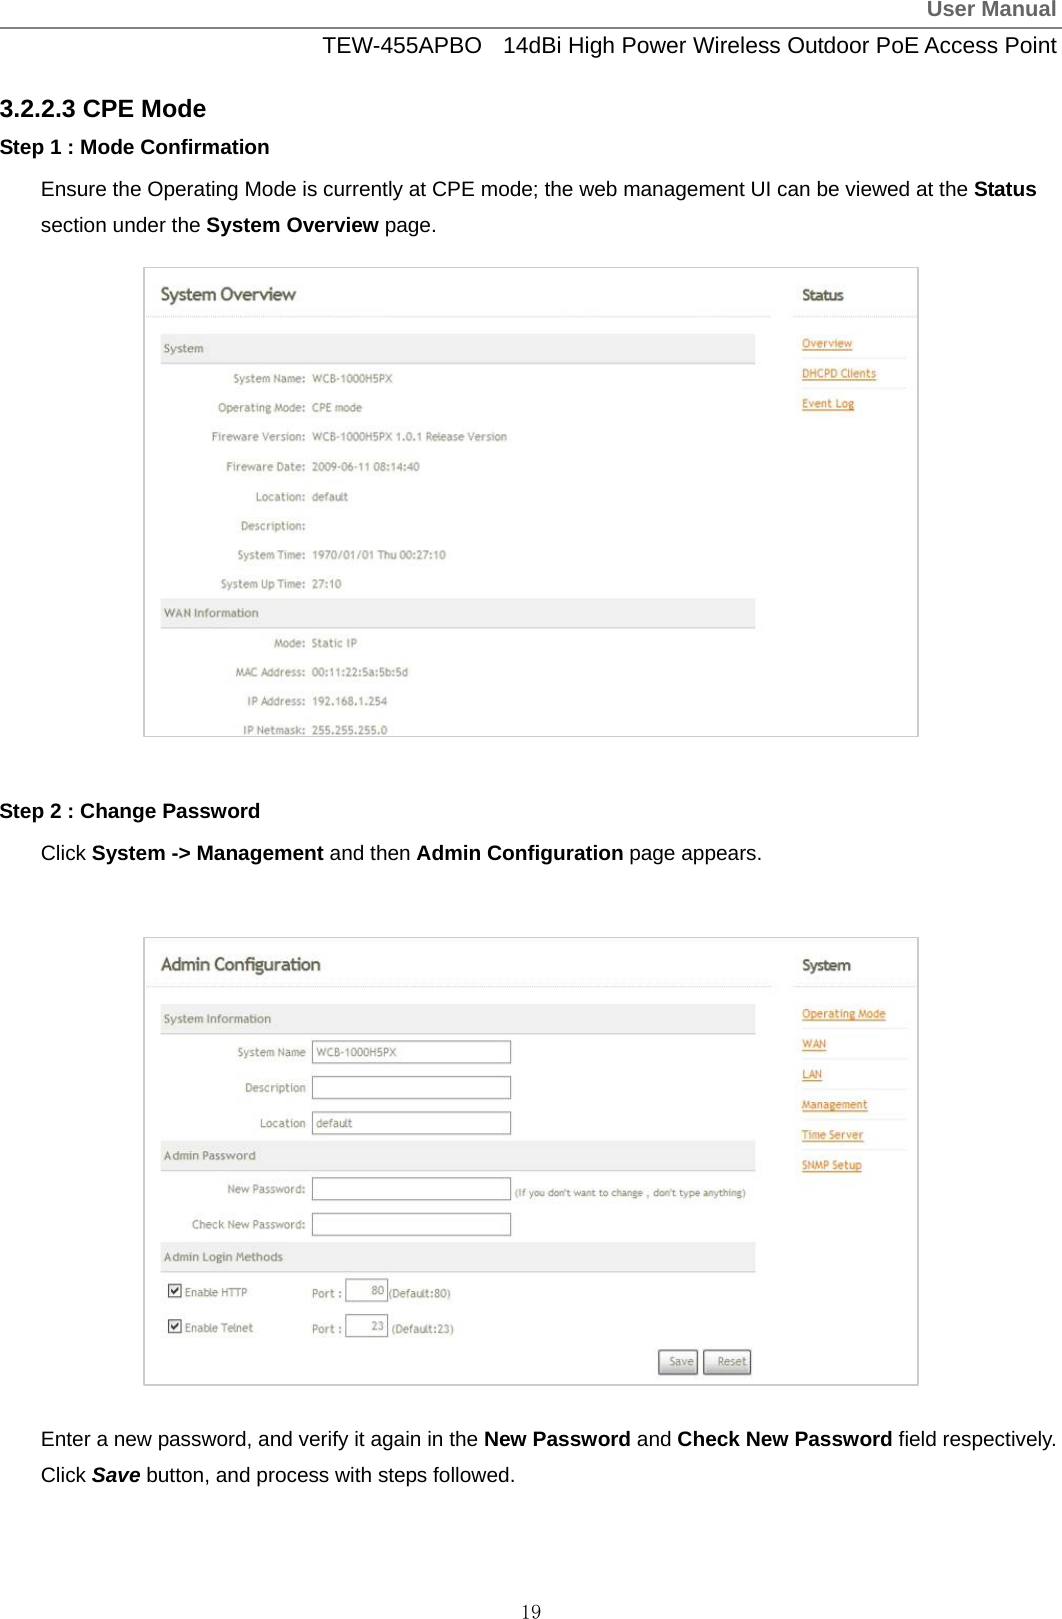 User ManualTEW-455APBO  14dBi High Power Wireless Outdoor PoE Access Point 19 3.2.2.3 CPE Mode Step 1 : Mode Confirmation Ensure the Operating Mode is currently at CPE mode; the web management UI can be viewed at the Status section under the System Overview page.              Step 2 : Change Password Click System -&gt; Management and then Admin Configuration page appears.              Enter a new password, and verify it again in the New Password and Check New Password field respectively. Click Save button, and process with steps followed.  